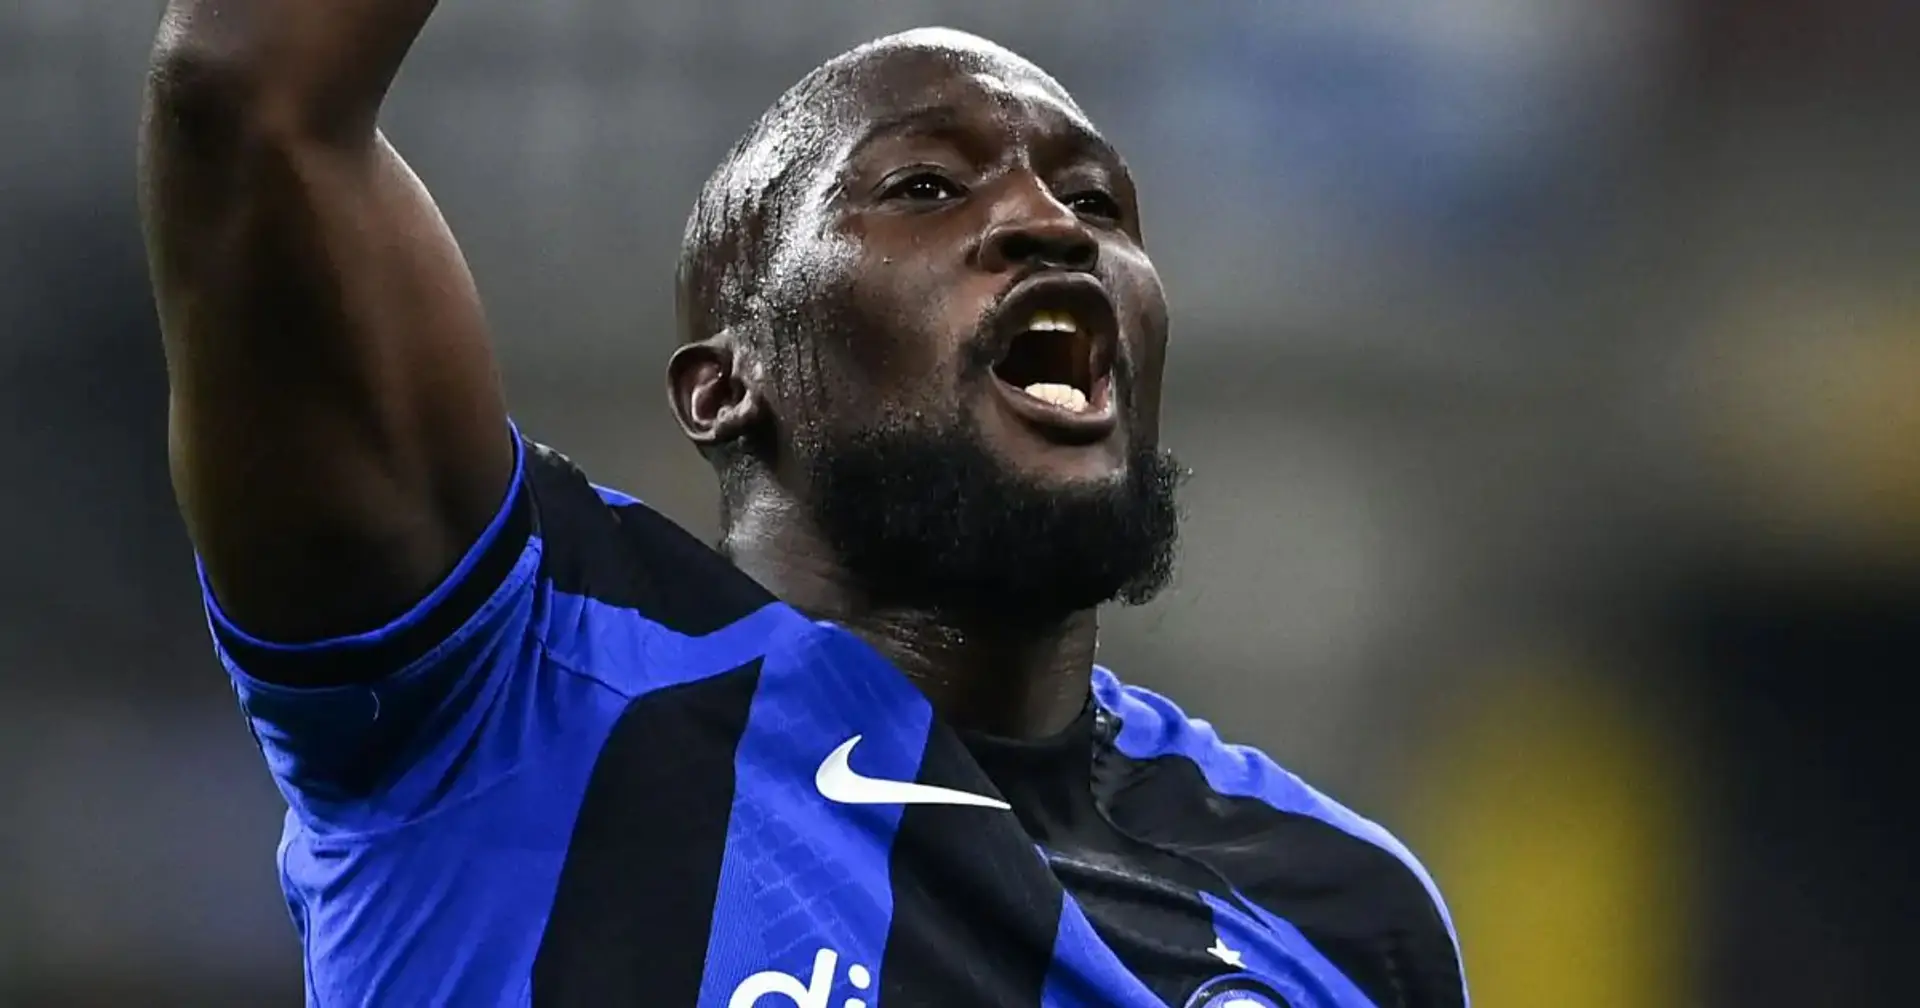 'Inter or nothing': Lukaku plans Chelsea trip with lawyer to negotiate another loan